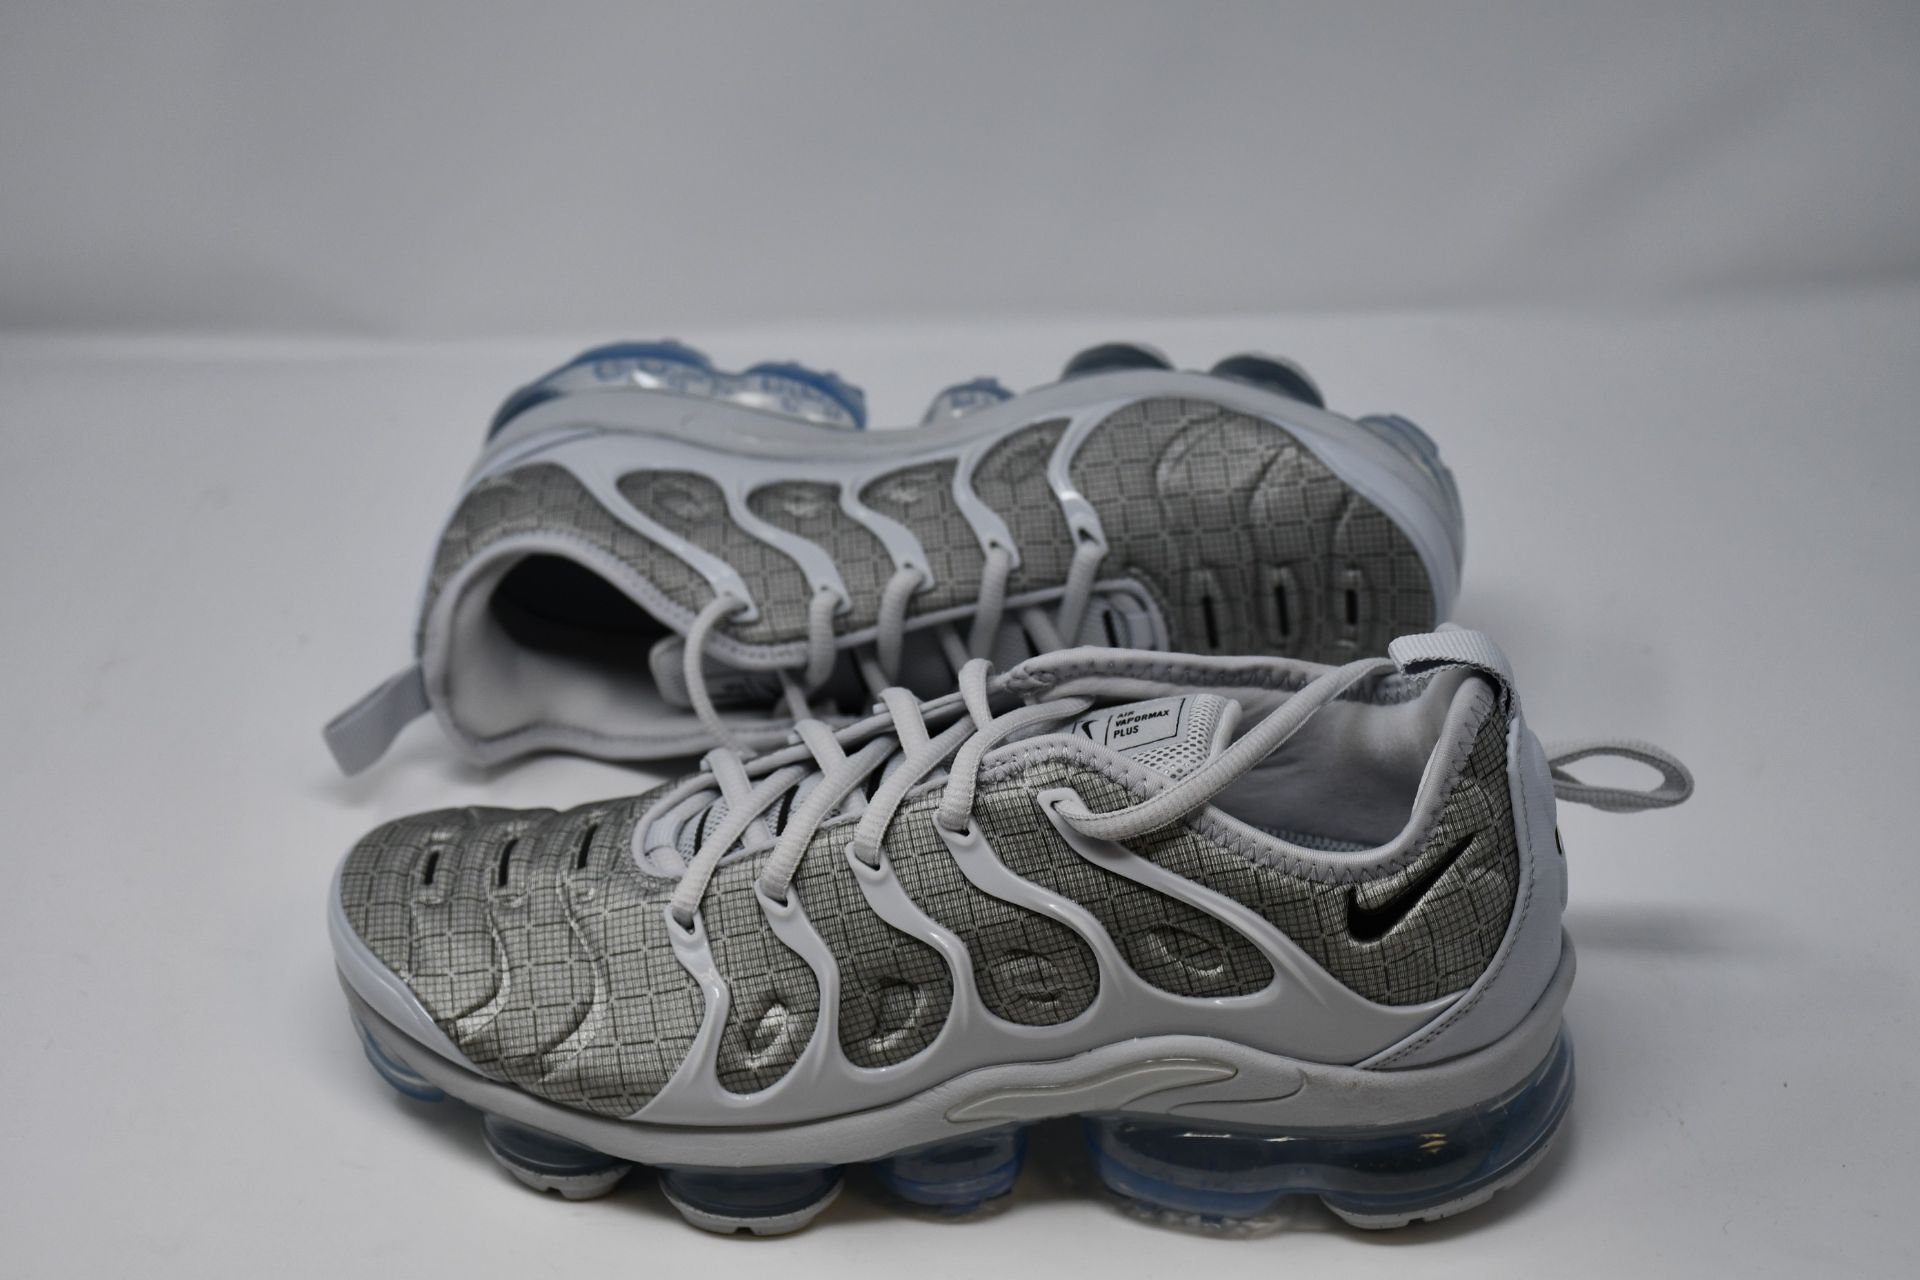 A pair of as new Nike Vapormax plus trainers (UK 7).